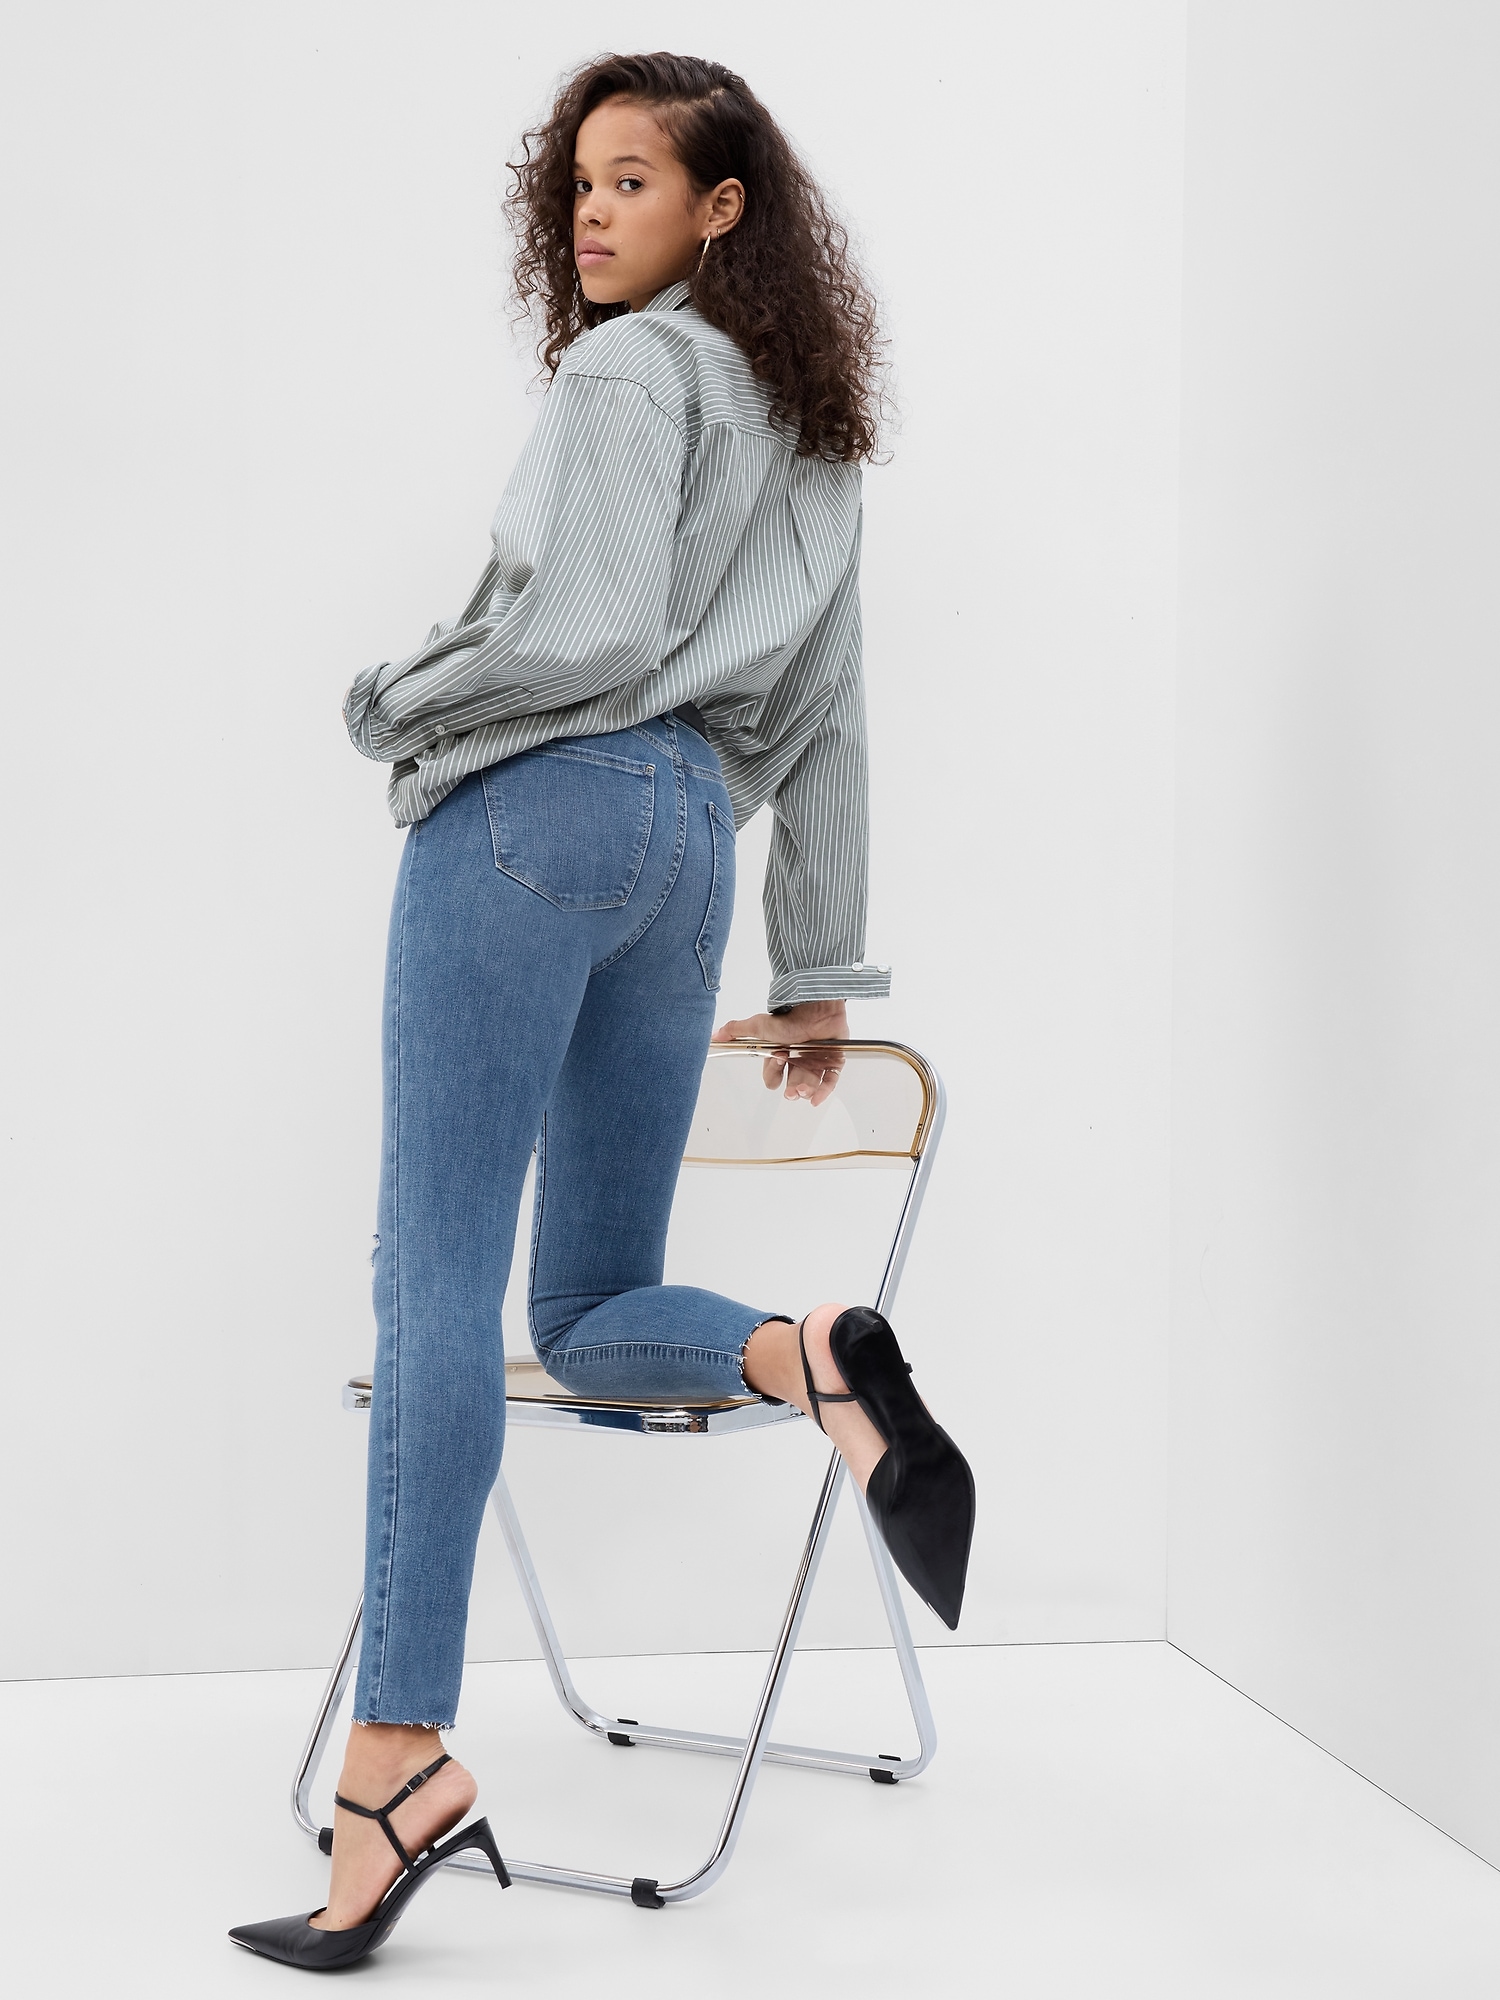 Buy Gap High Waisted Universal Legging Jeans from the Gap online shop